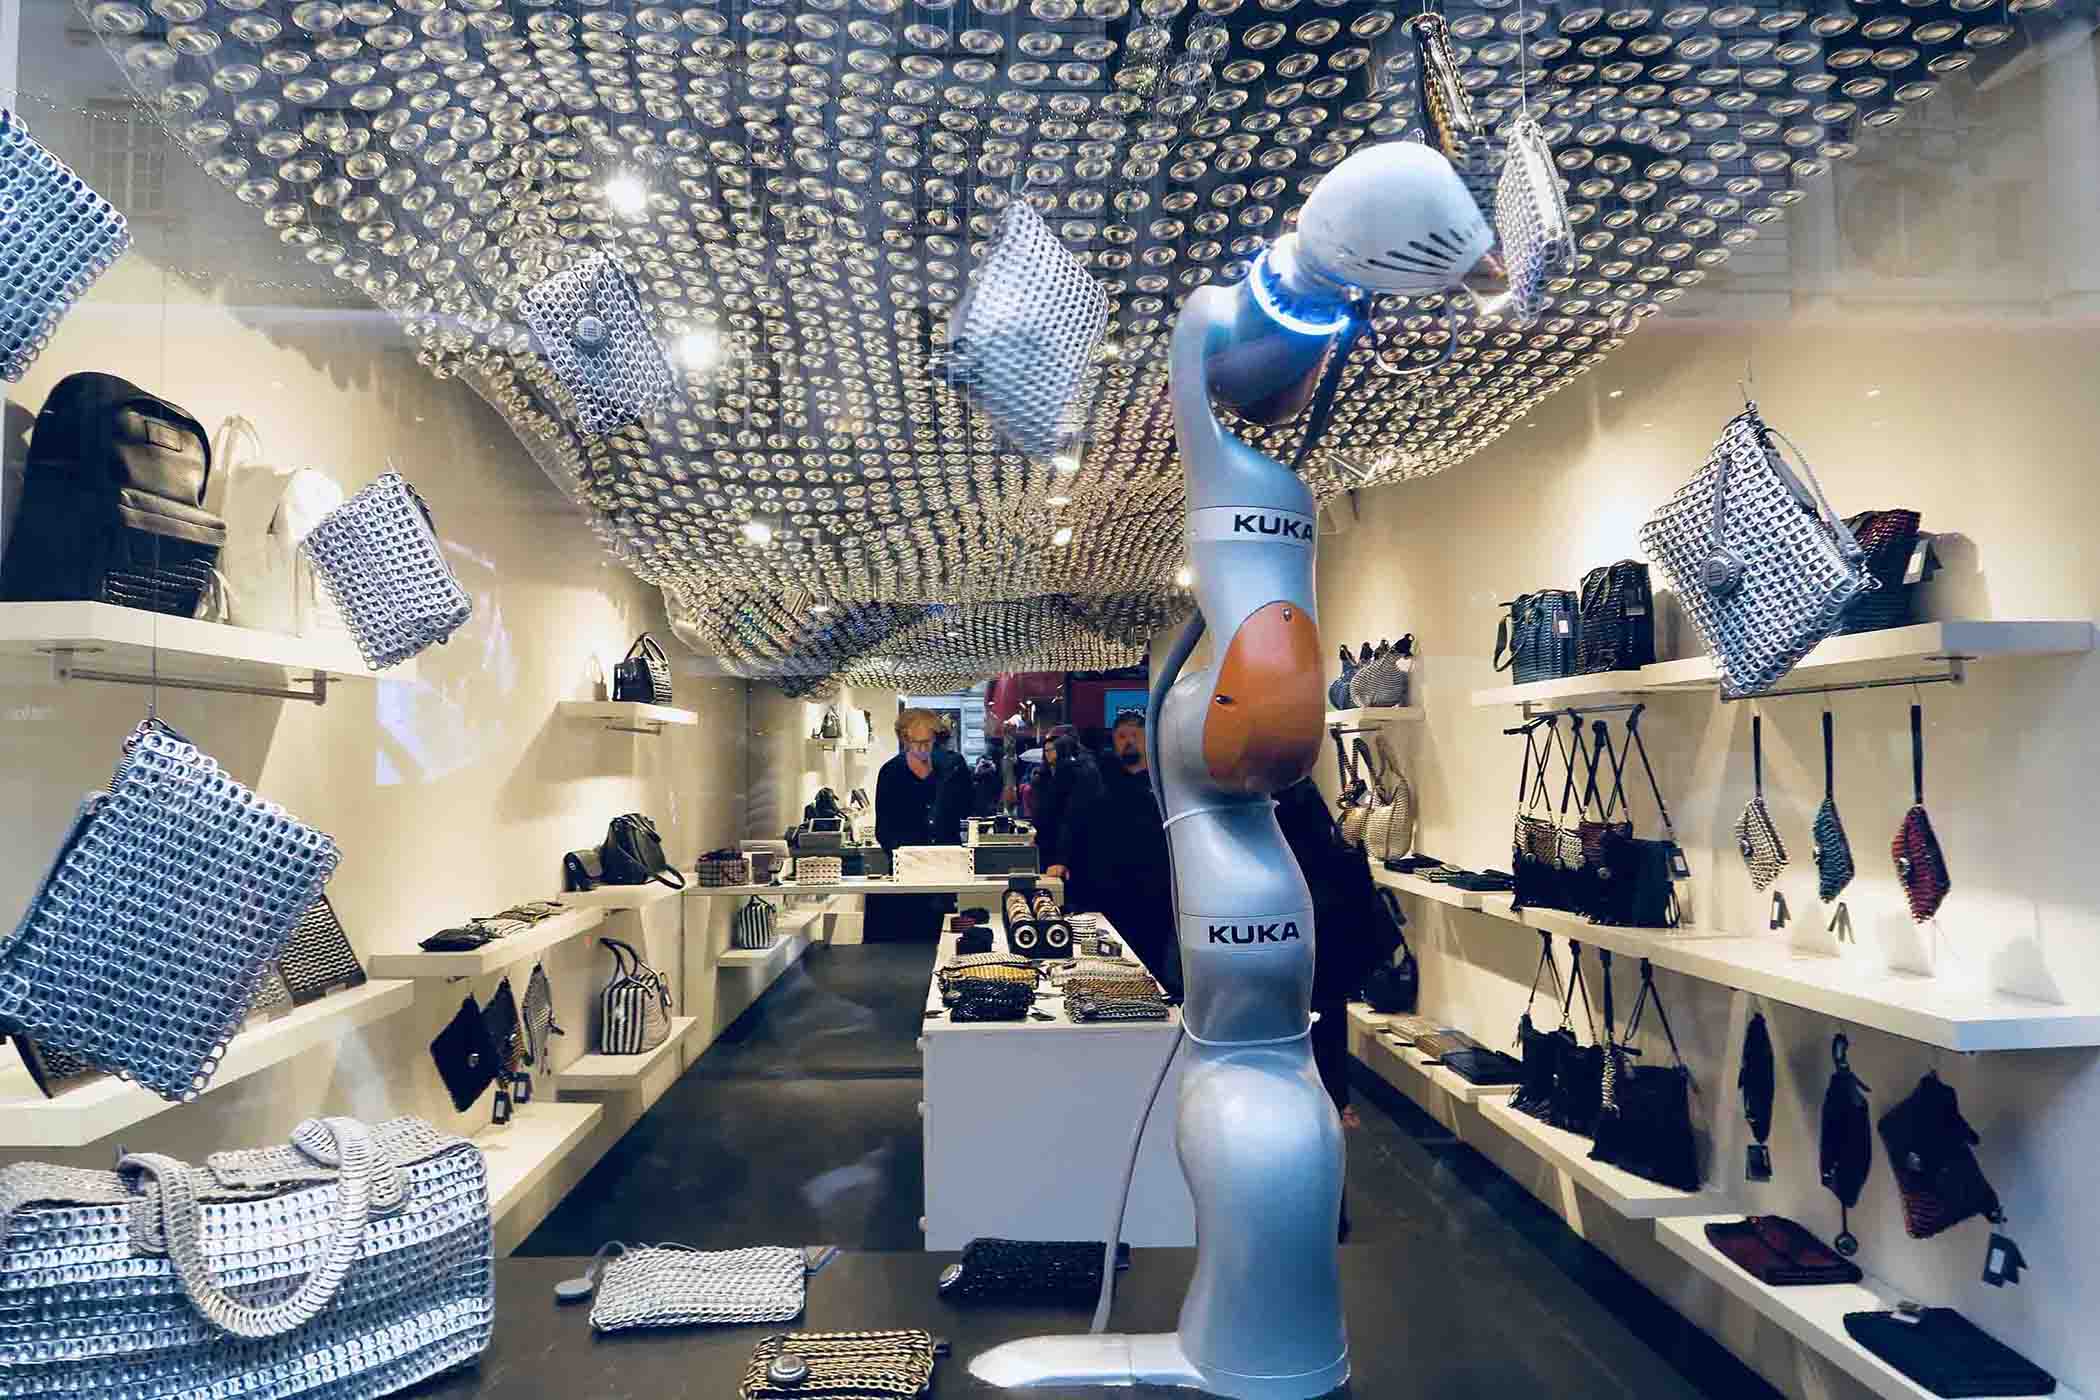 Bottletop and Ai Build Use Sustainable Materials to 3D Print Store ... - 12680167 Bottletop Flagship WorlDs First Store 3D PrinteD By Robots